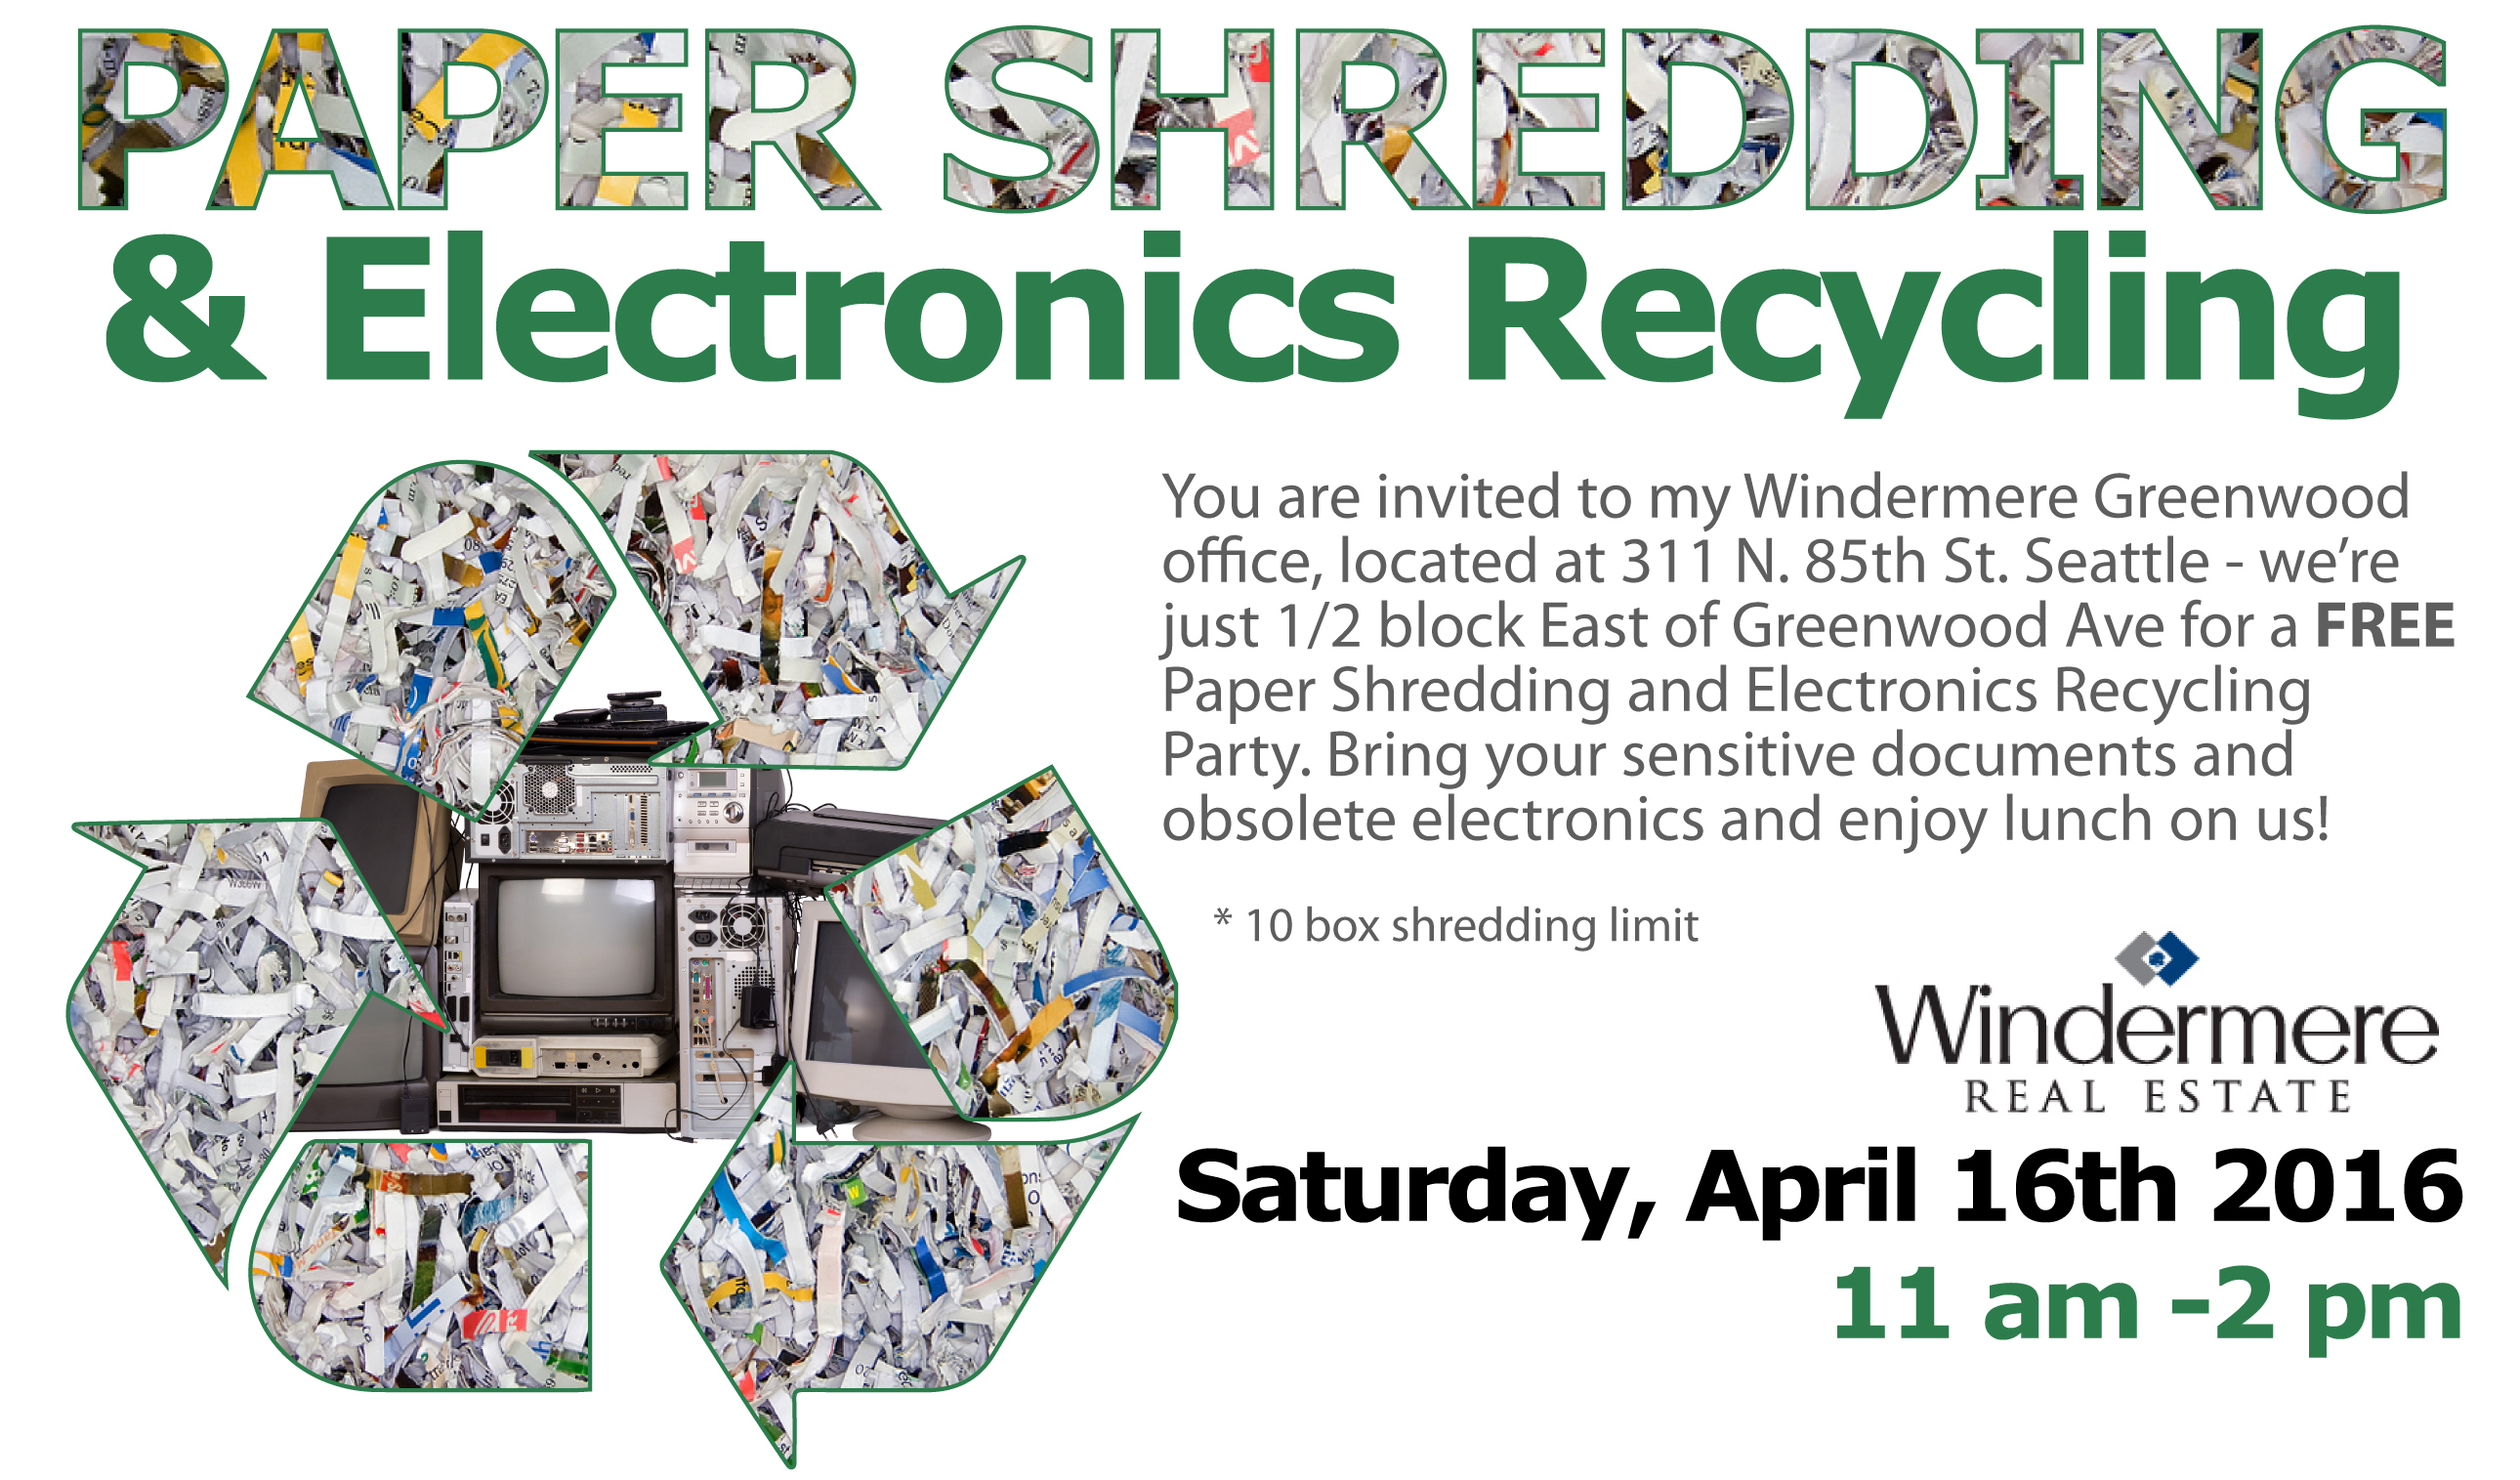 Annual Paper Shredding & Recycling Event